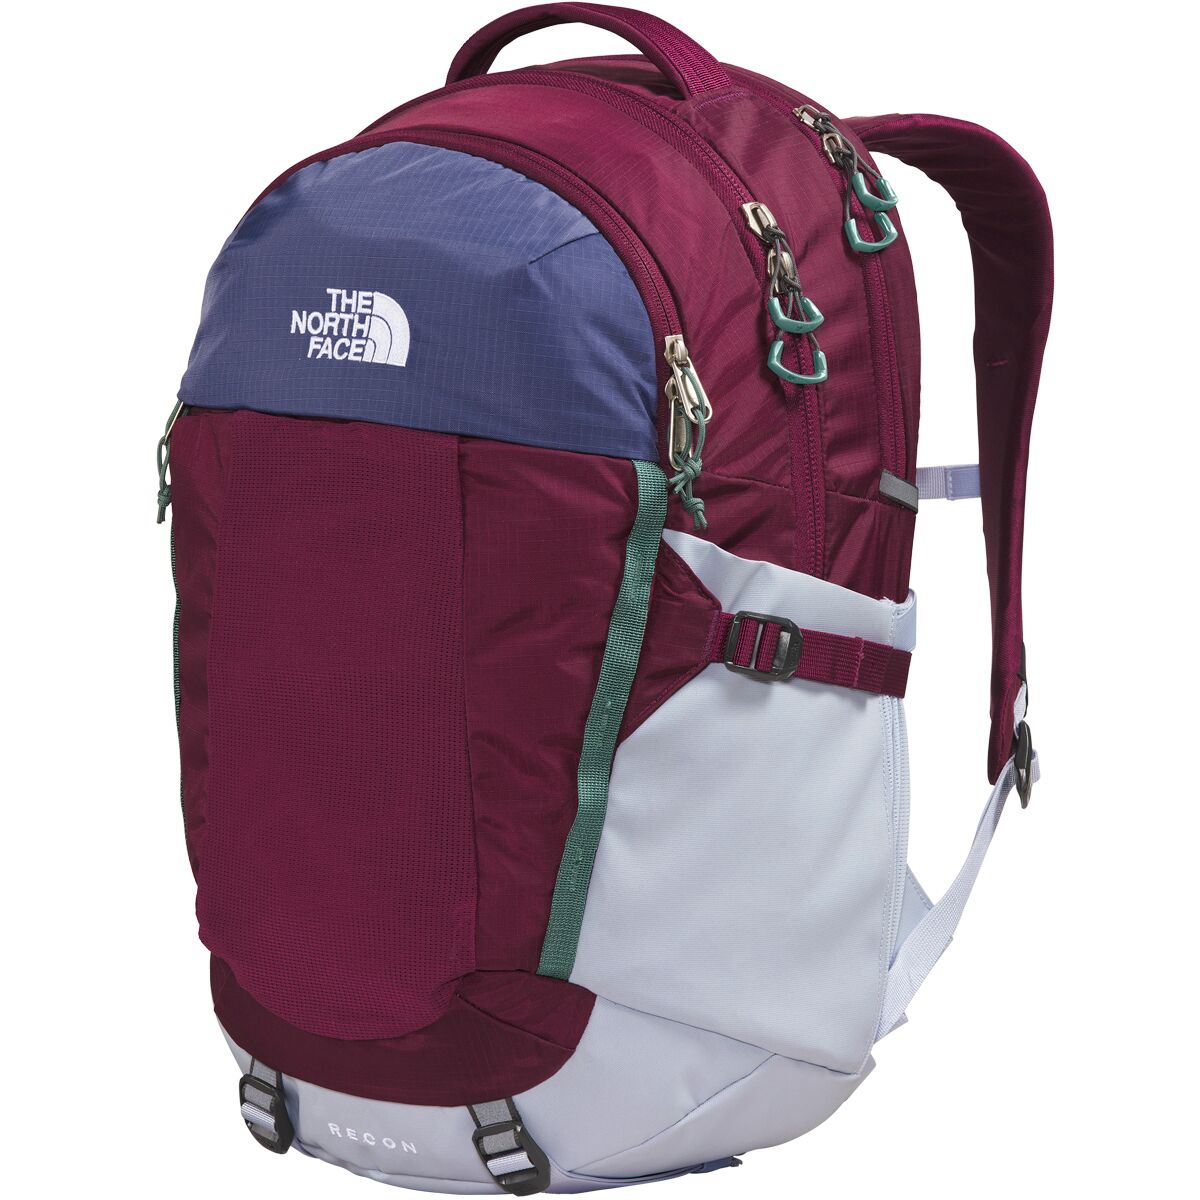 The North Face Recon 30L Backpack - Women's